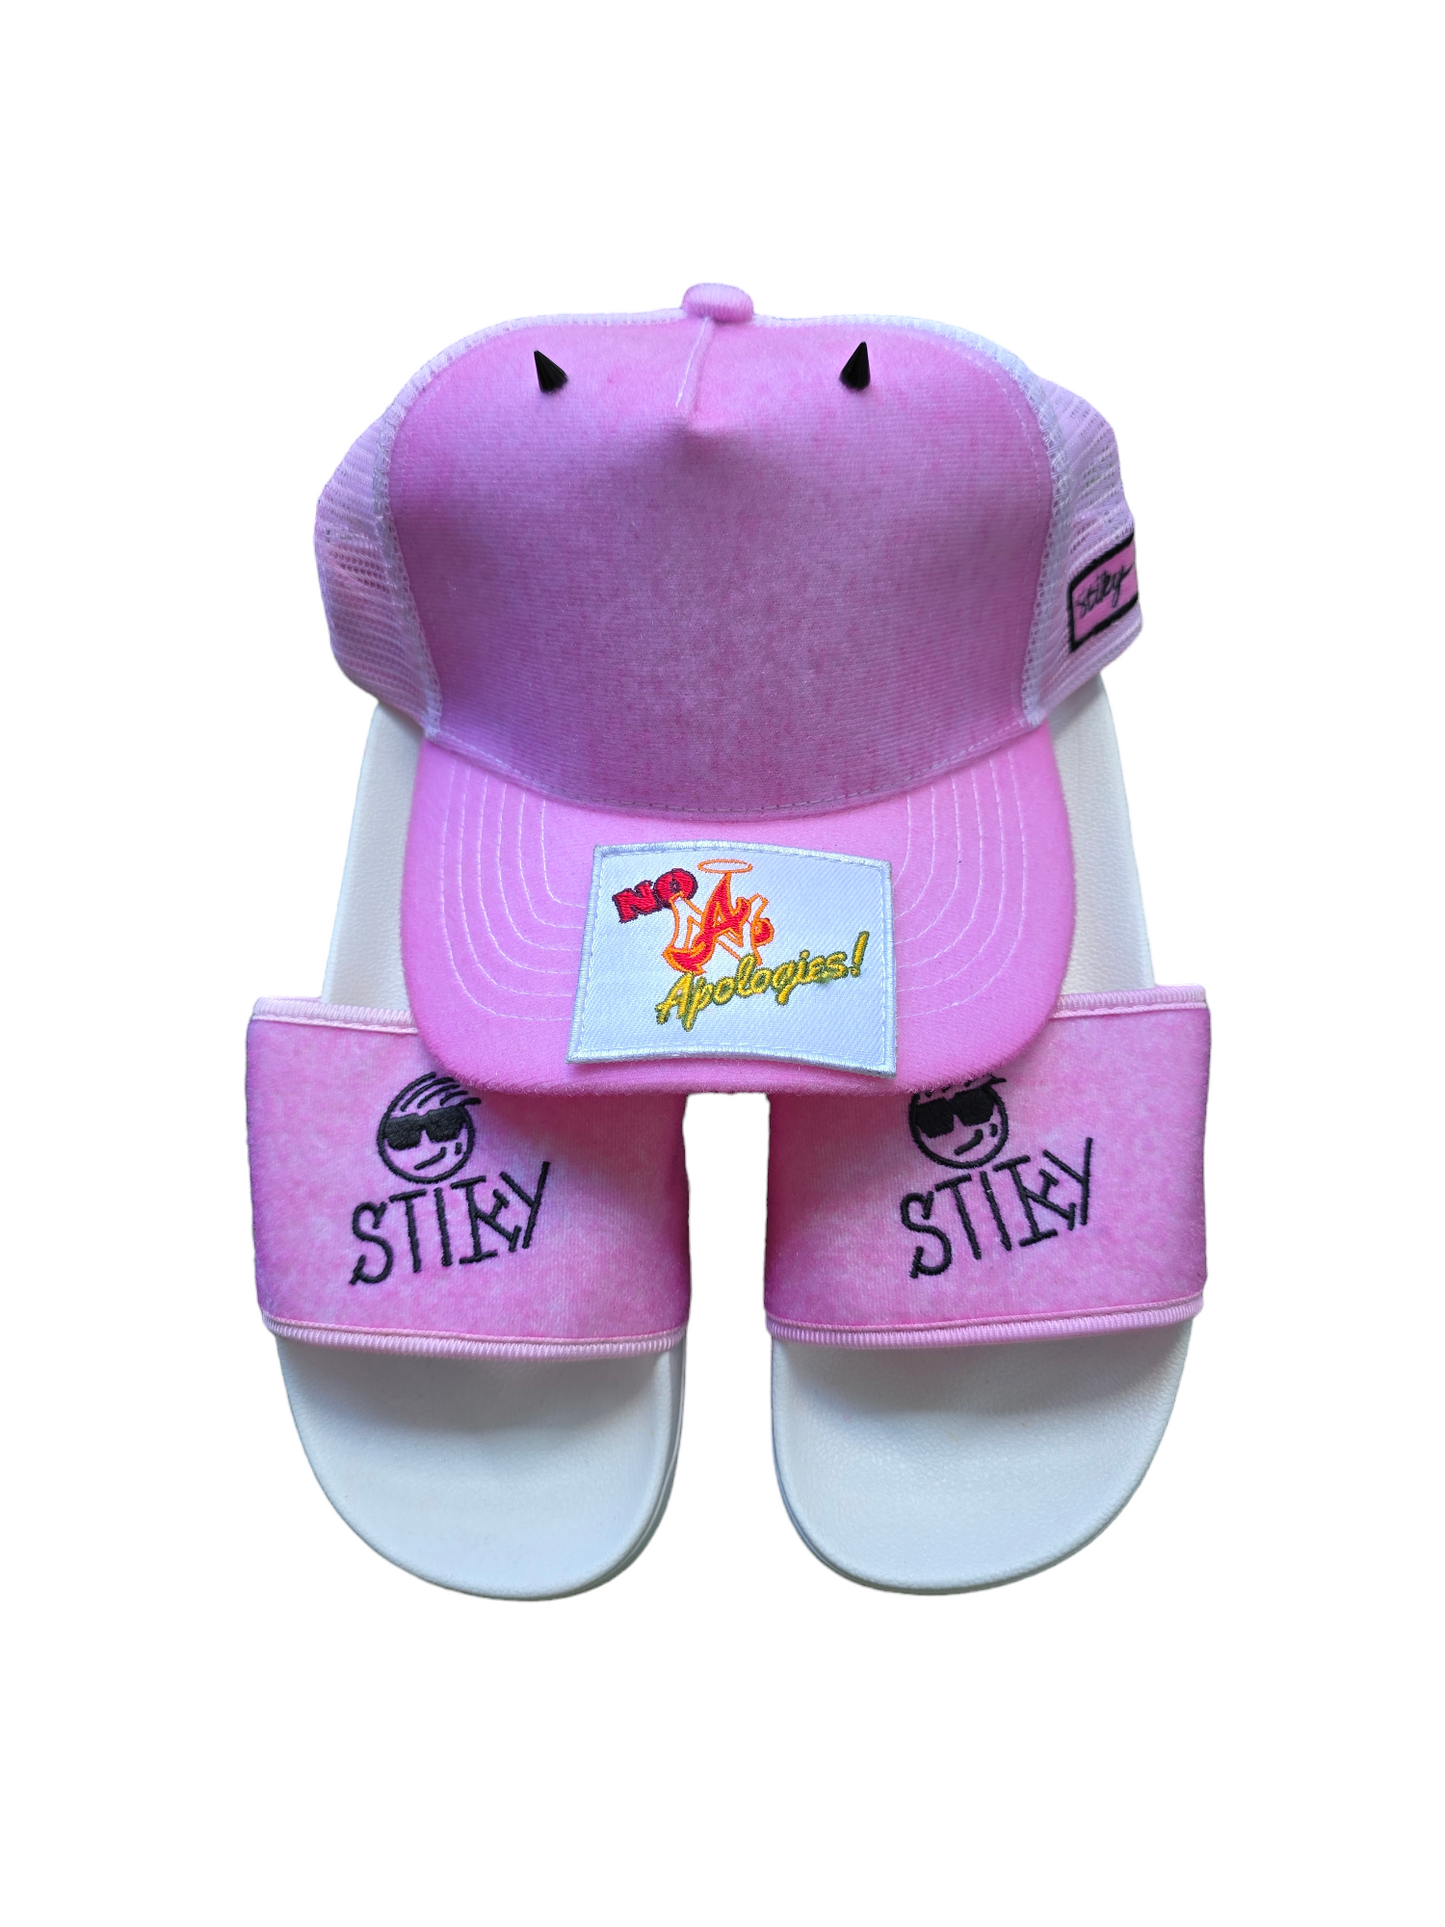 Blank Canvas Stiky Trucker Hat - "Pinky Limited Edition"